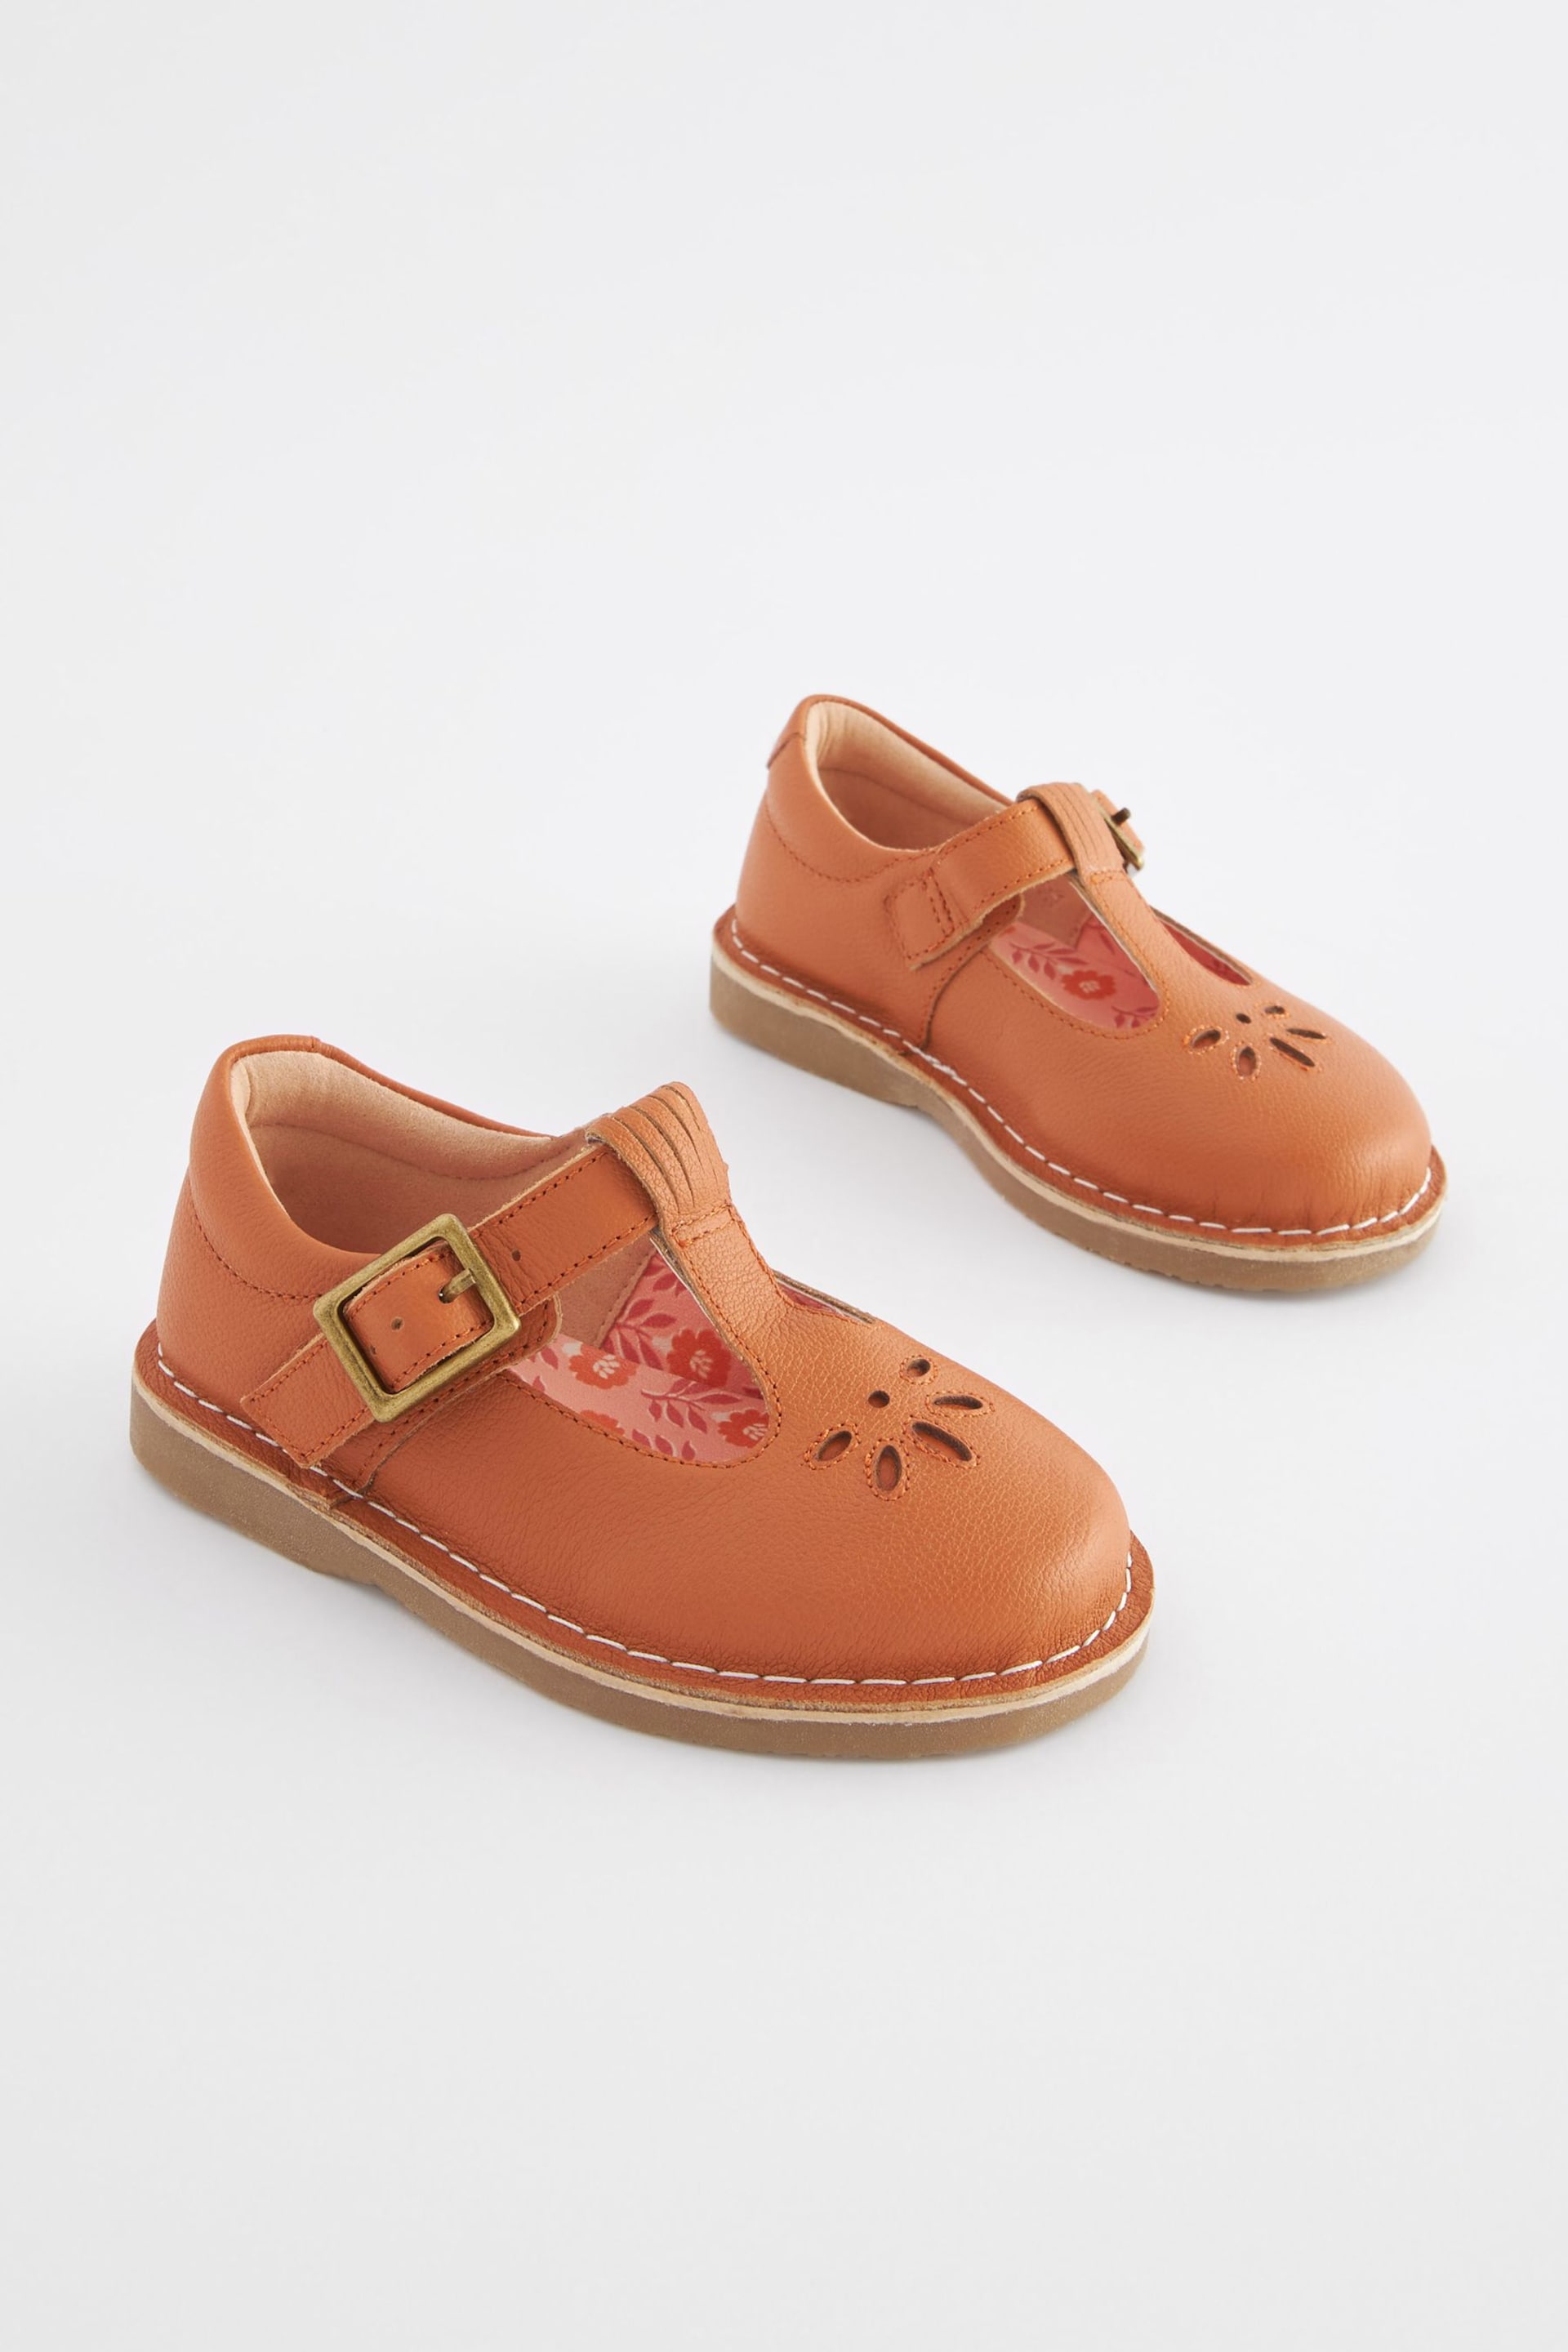 Tan Brown Leather T-Bar Shoes - Image 1 of 6